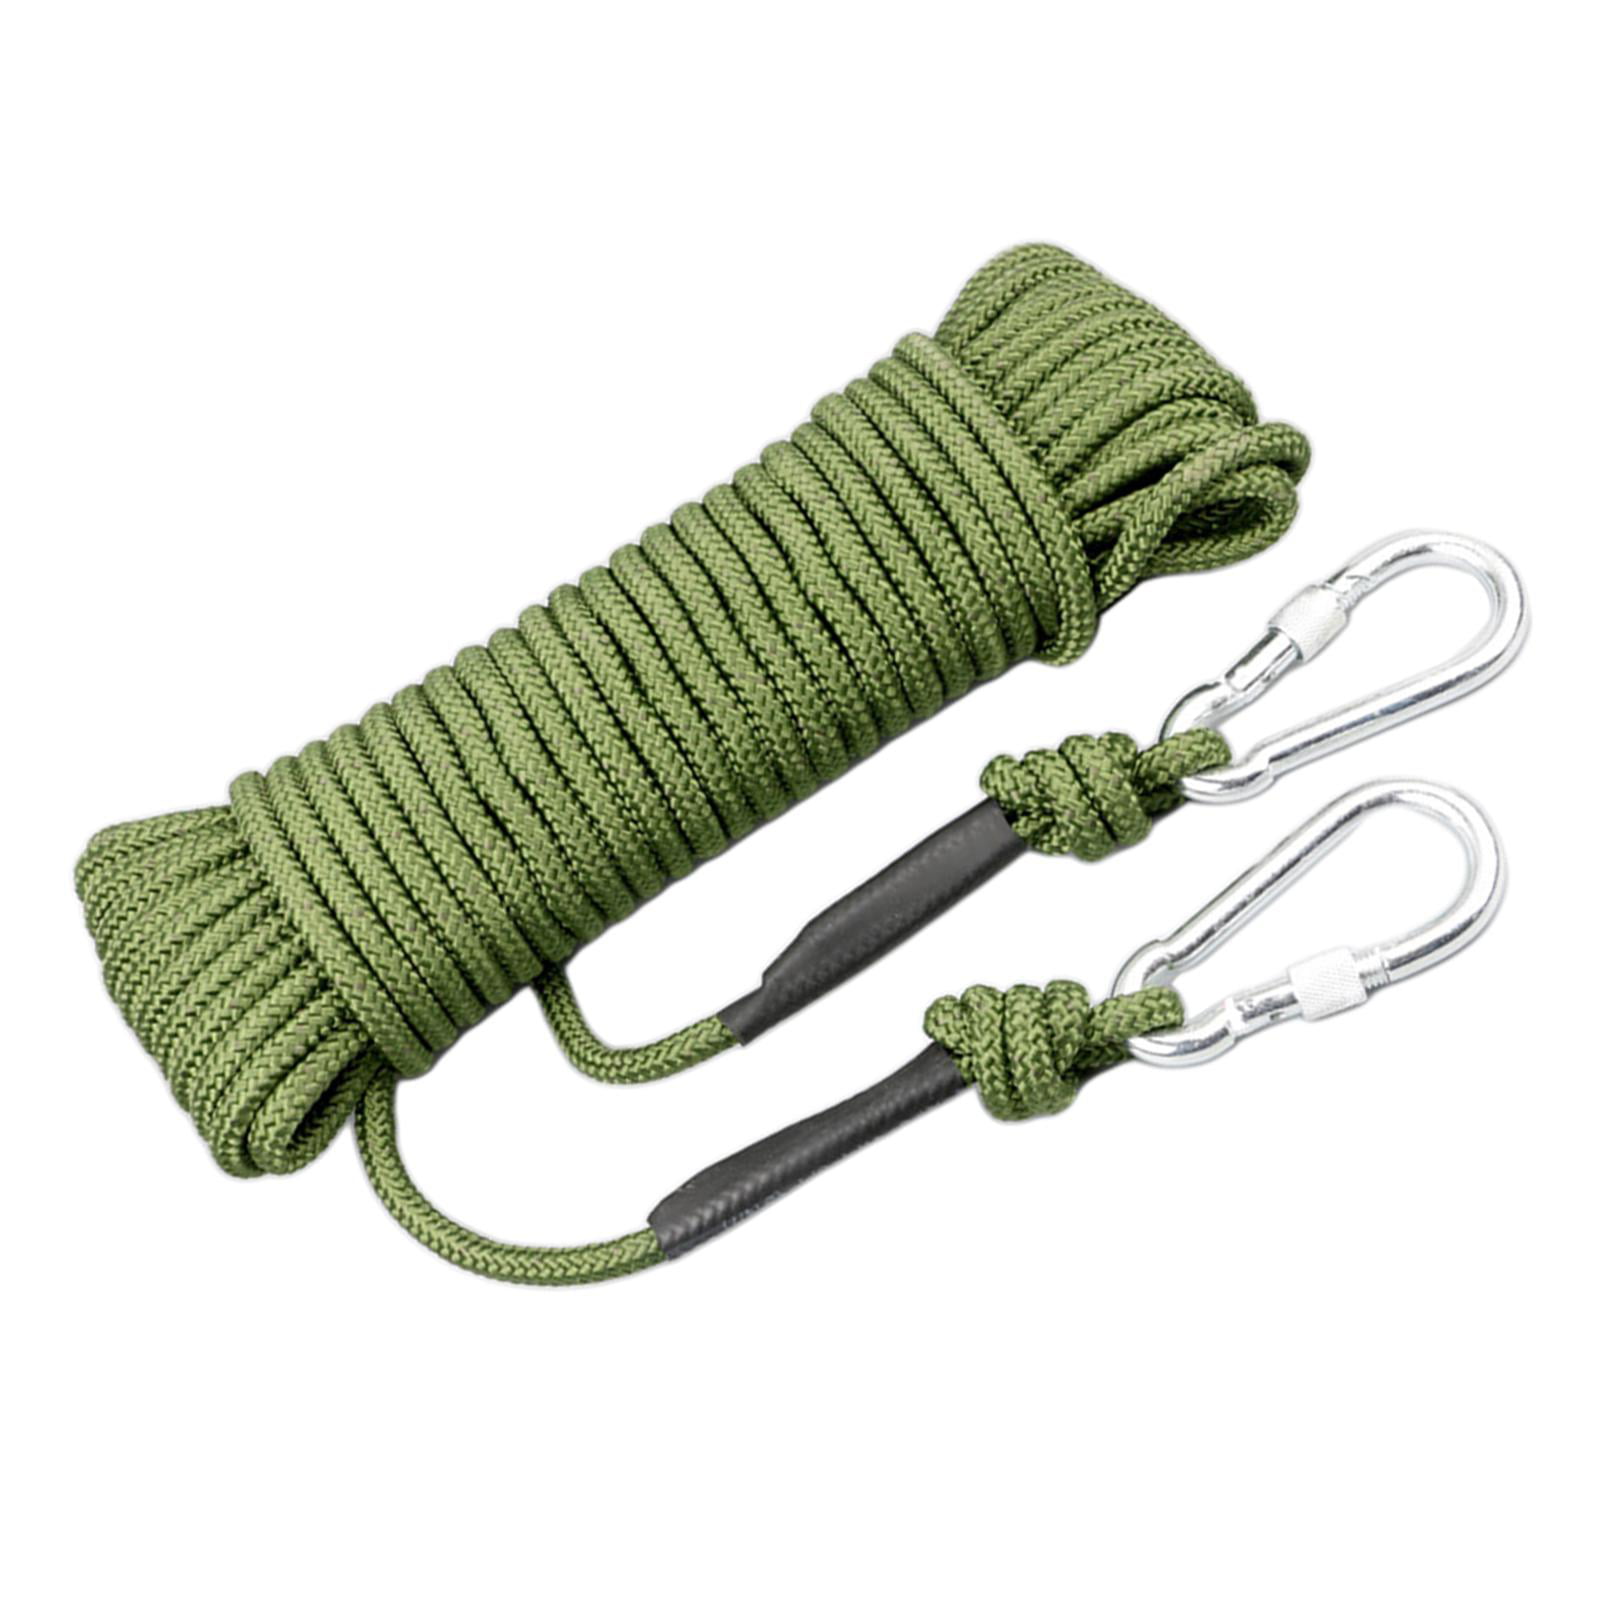 8mm Heavy Duty Tree Rock Climbing Rope 10/20m Survival Cord Outdoor Safety Tool 